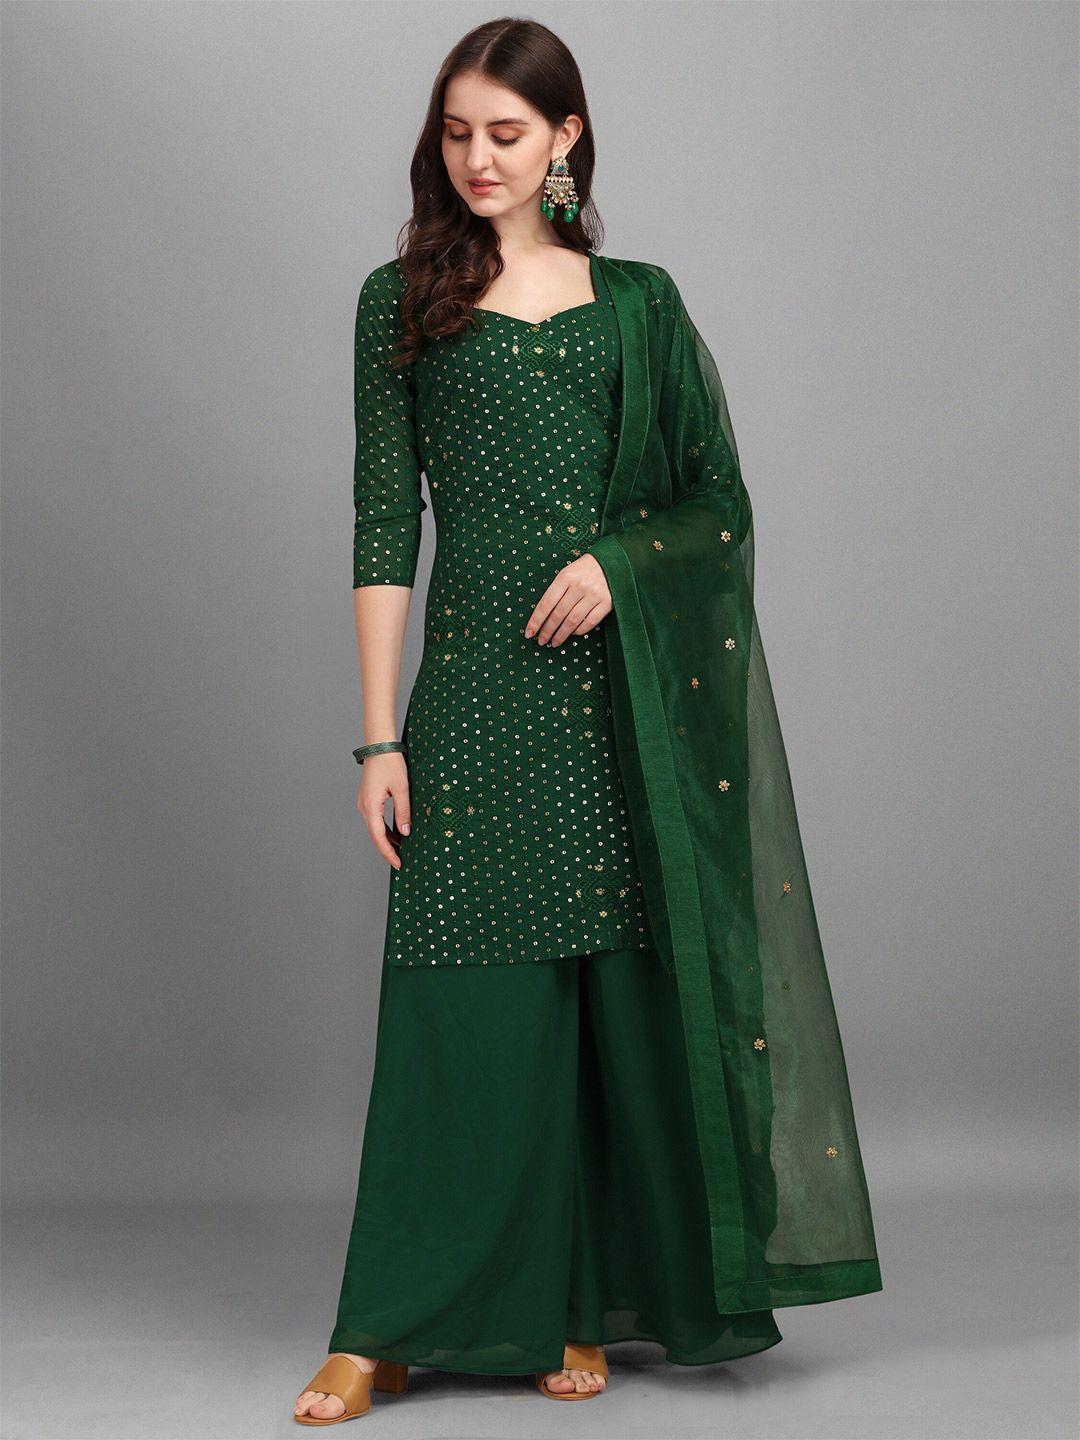 Fashion Basket Green Embroidered Semi-Stitched Dress Material